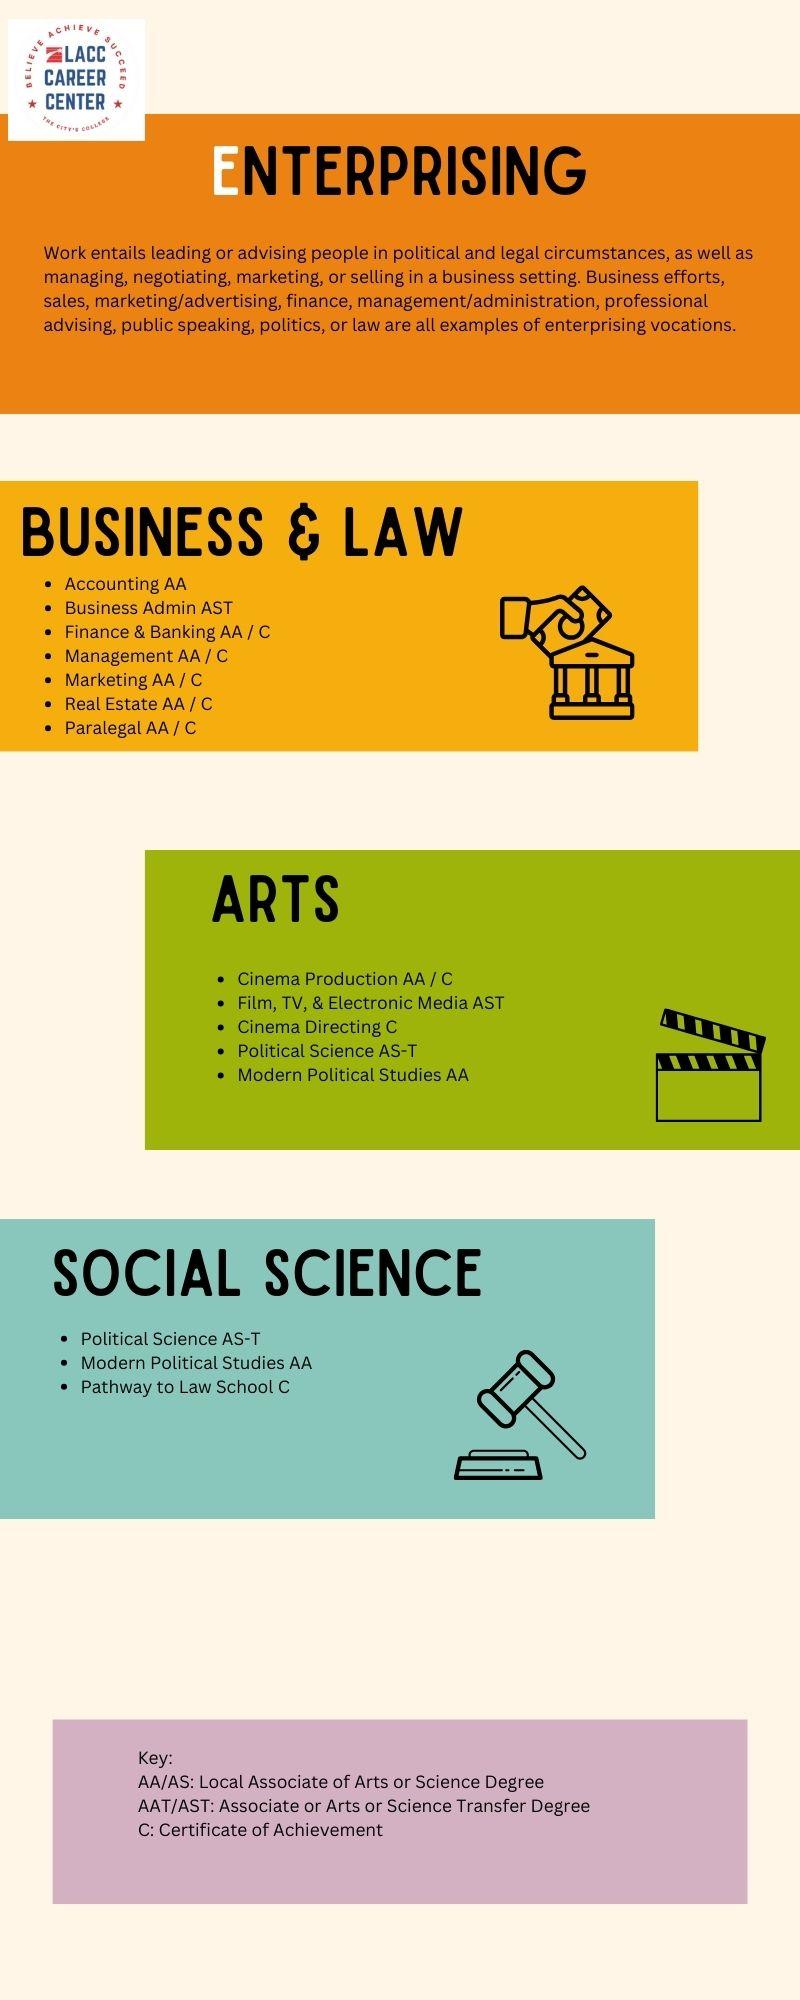 Infographic showing majors that align with Enterprising interests